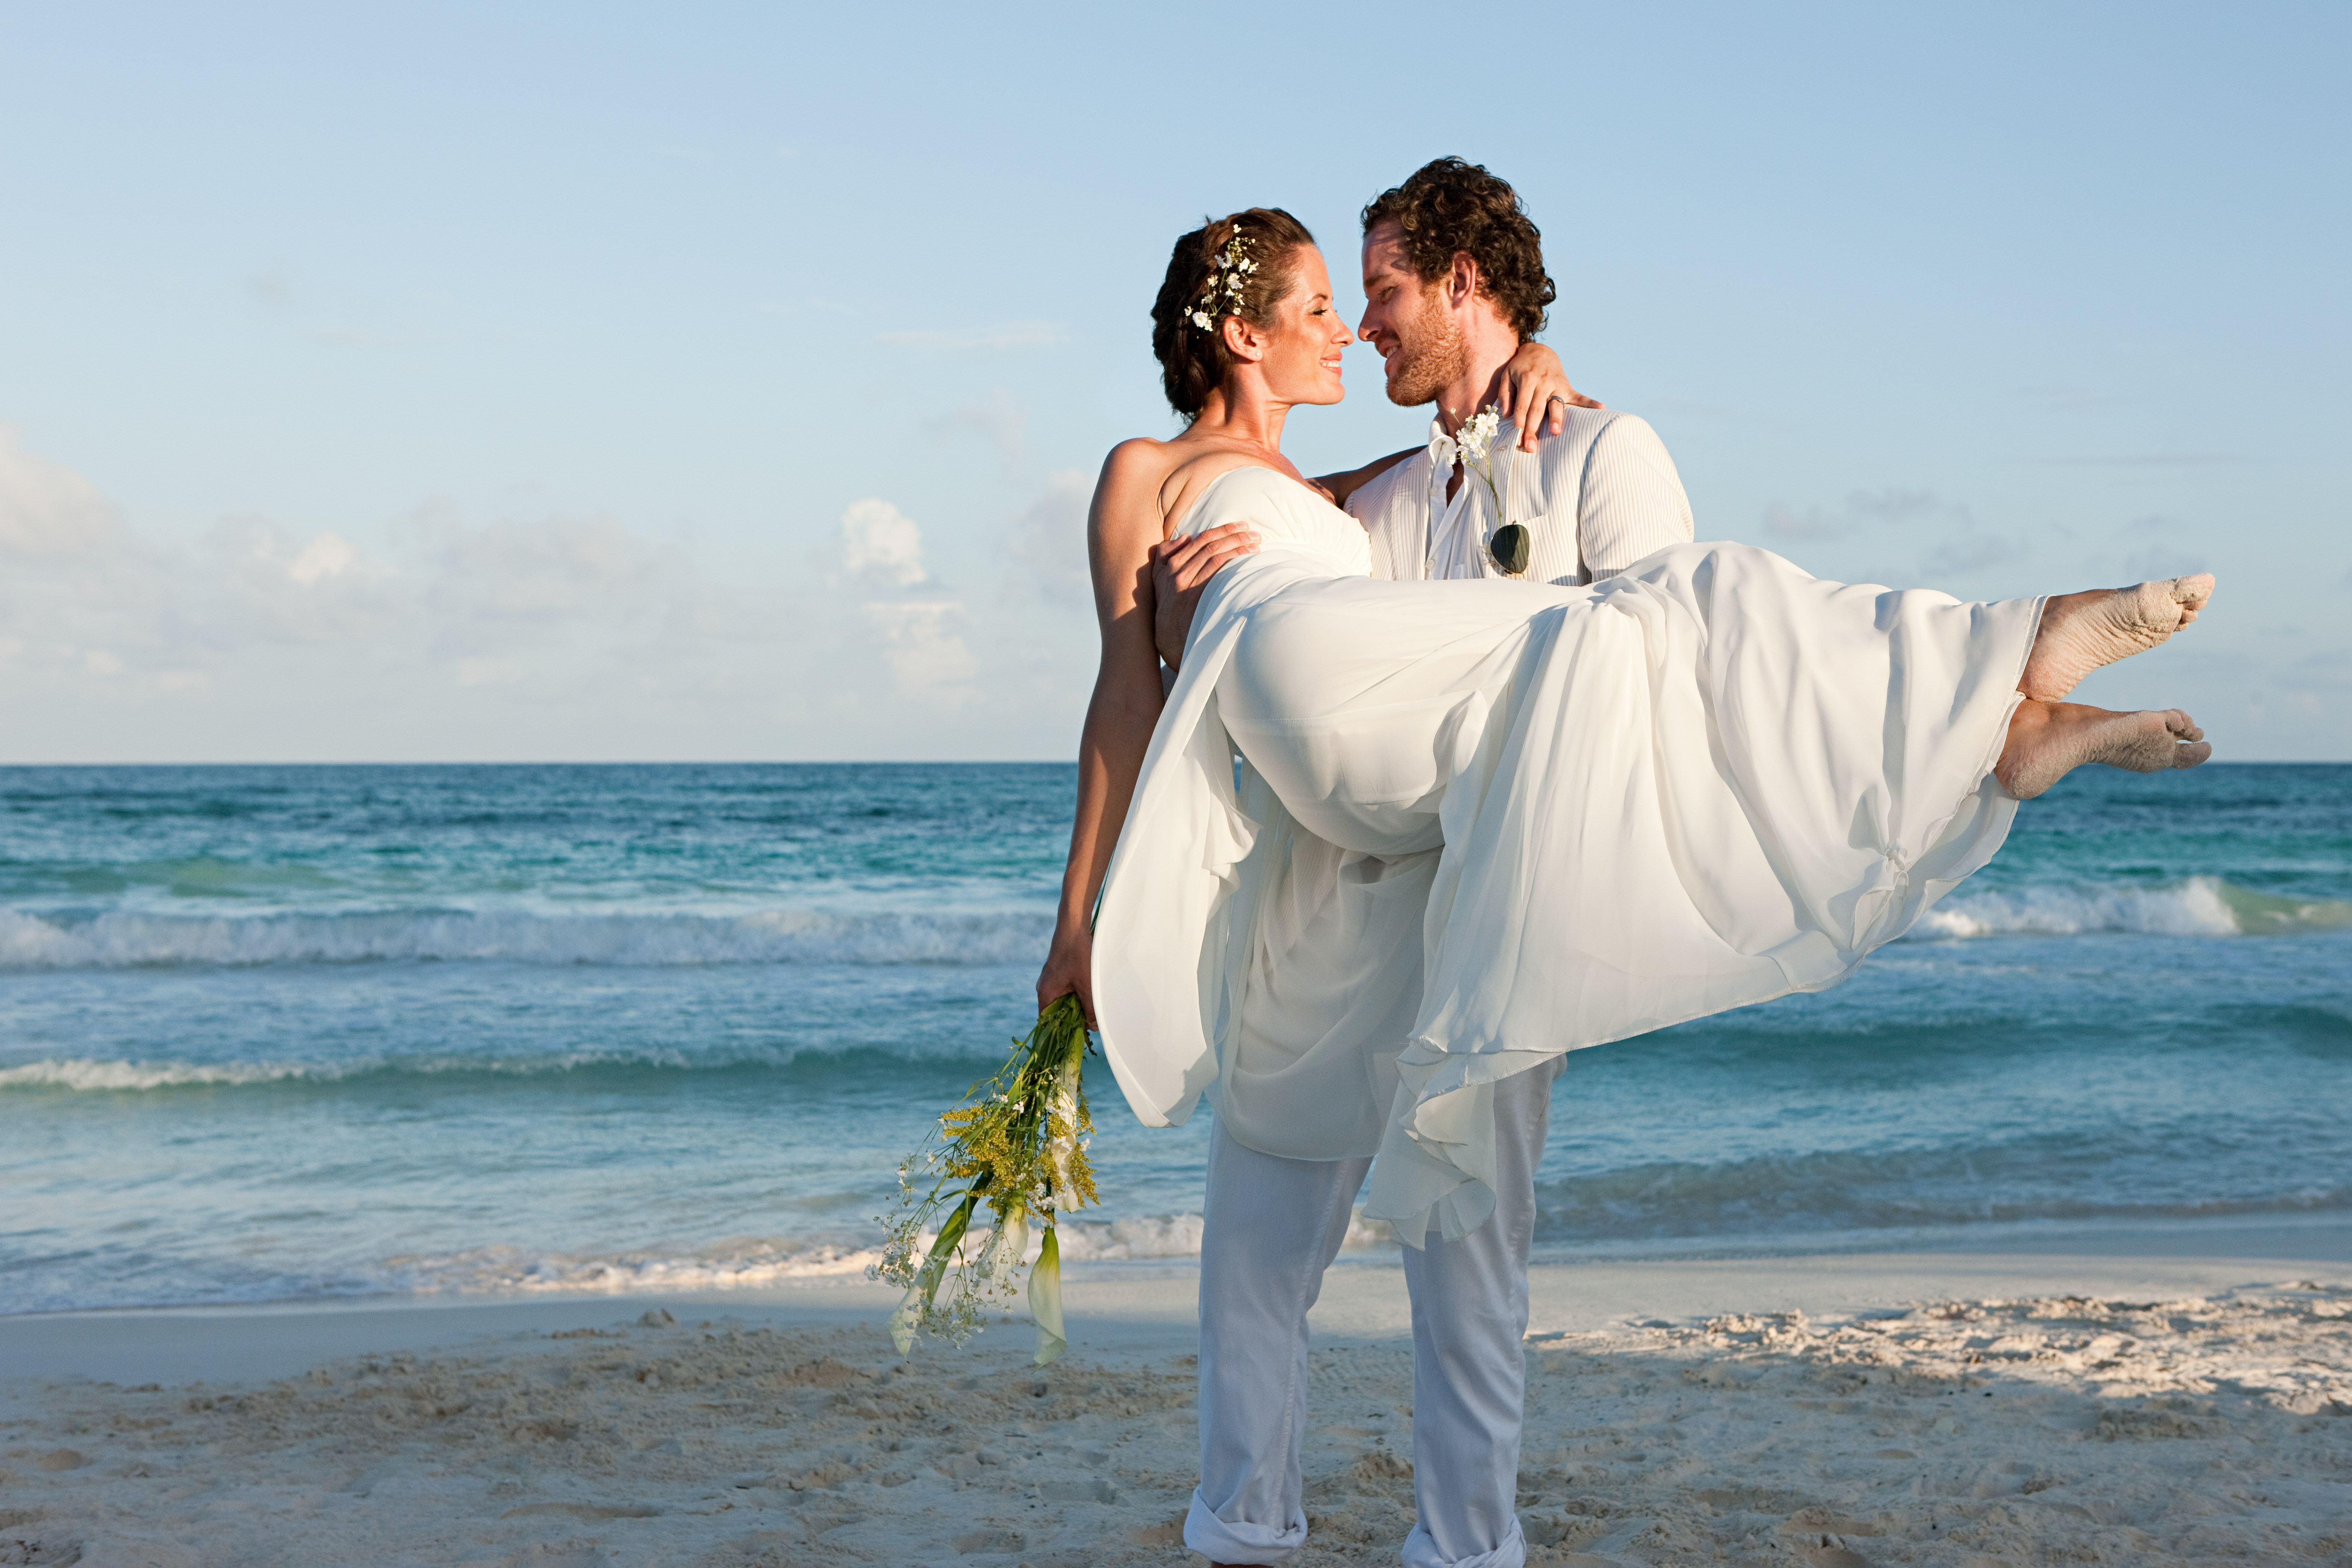 Married couple on beach | Source: Getty Images